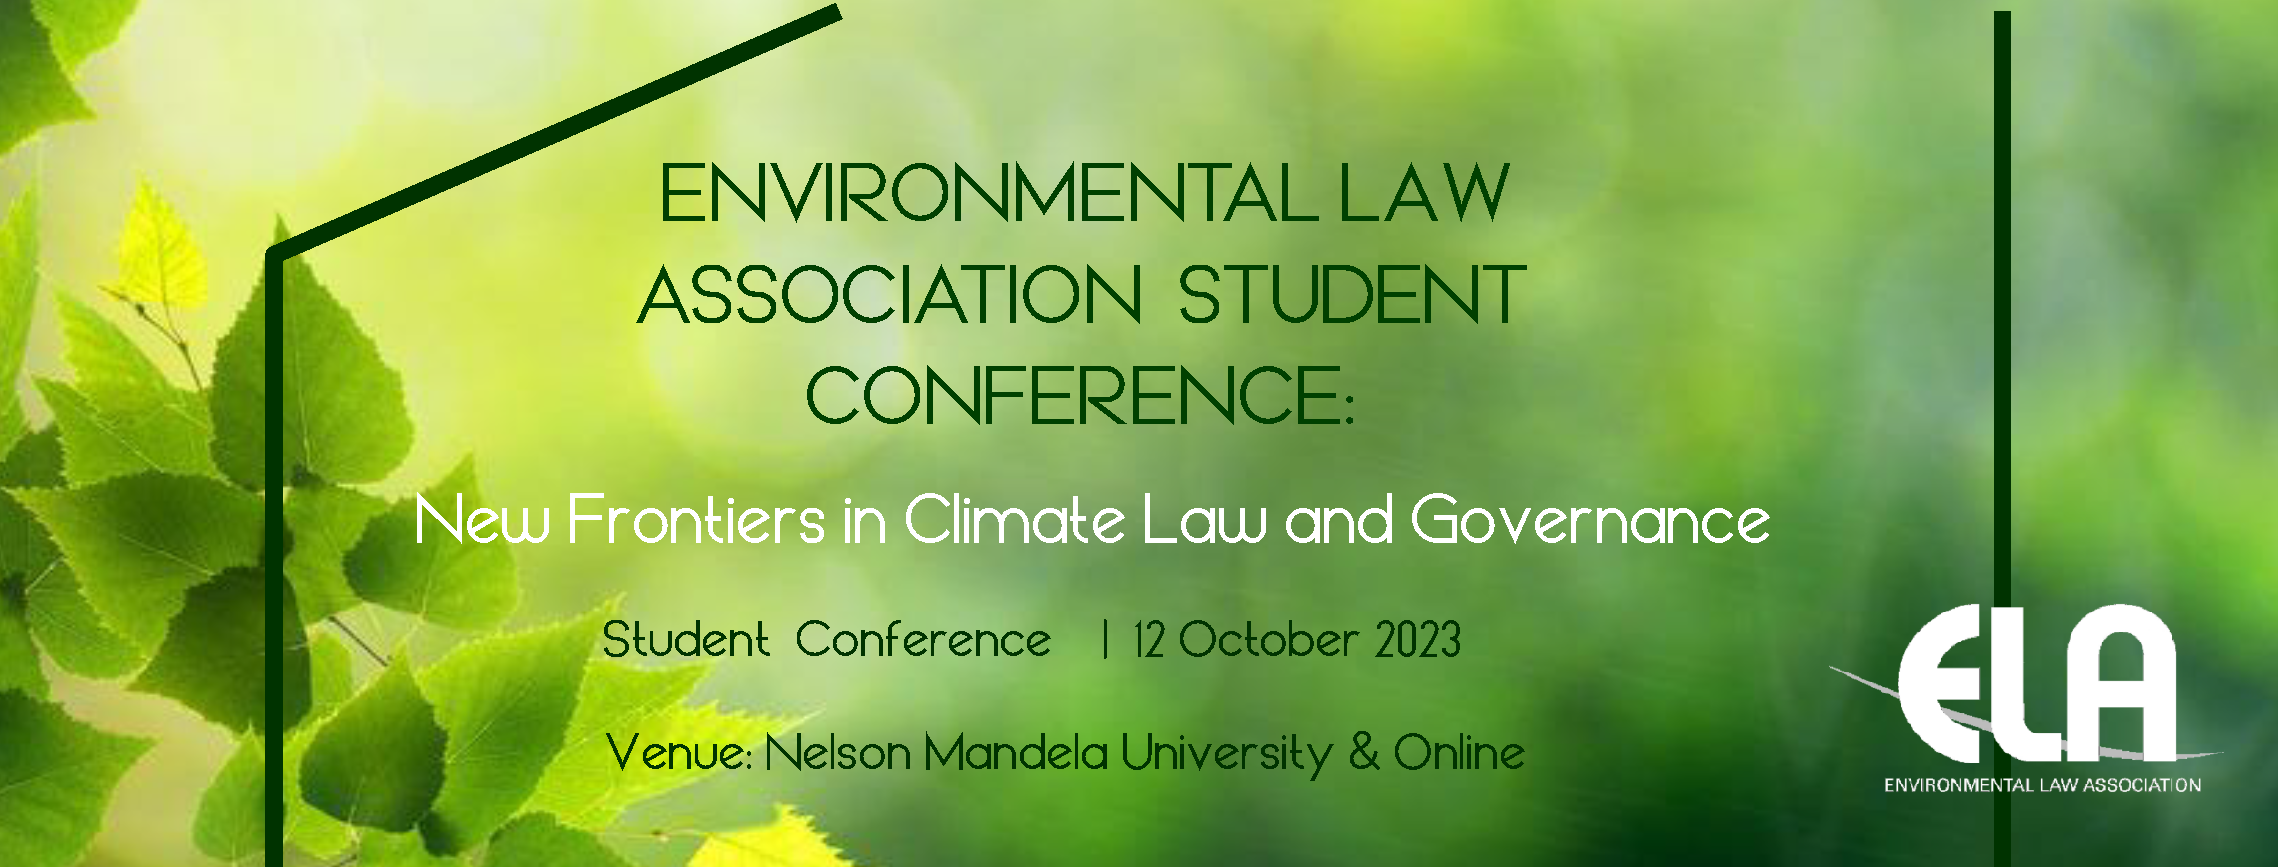 Student Conference 2023 - New Frontiers in Climate Law and Governance